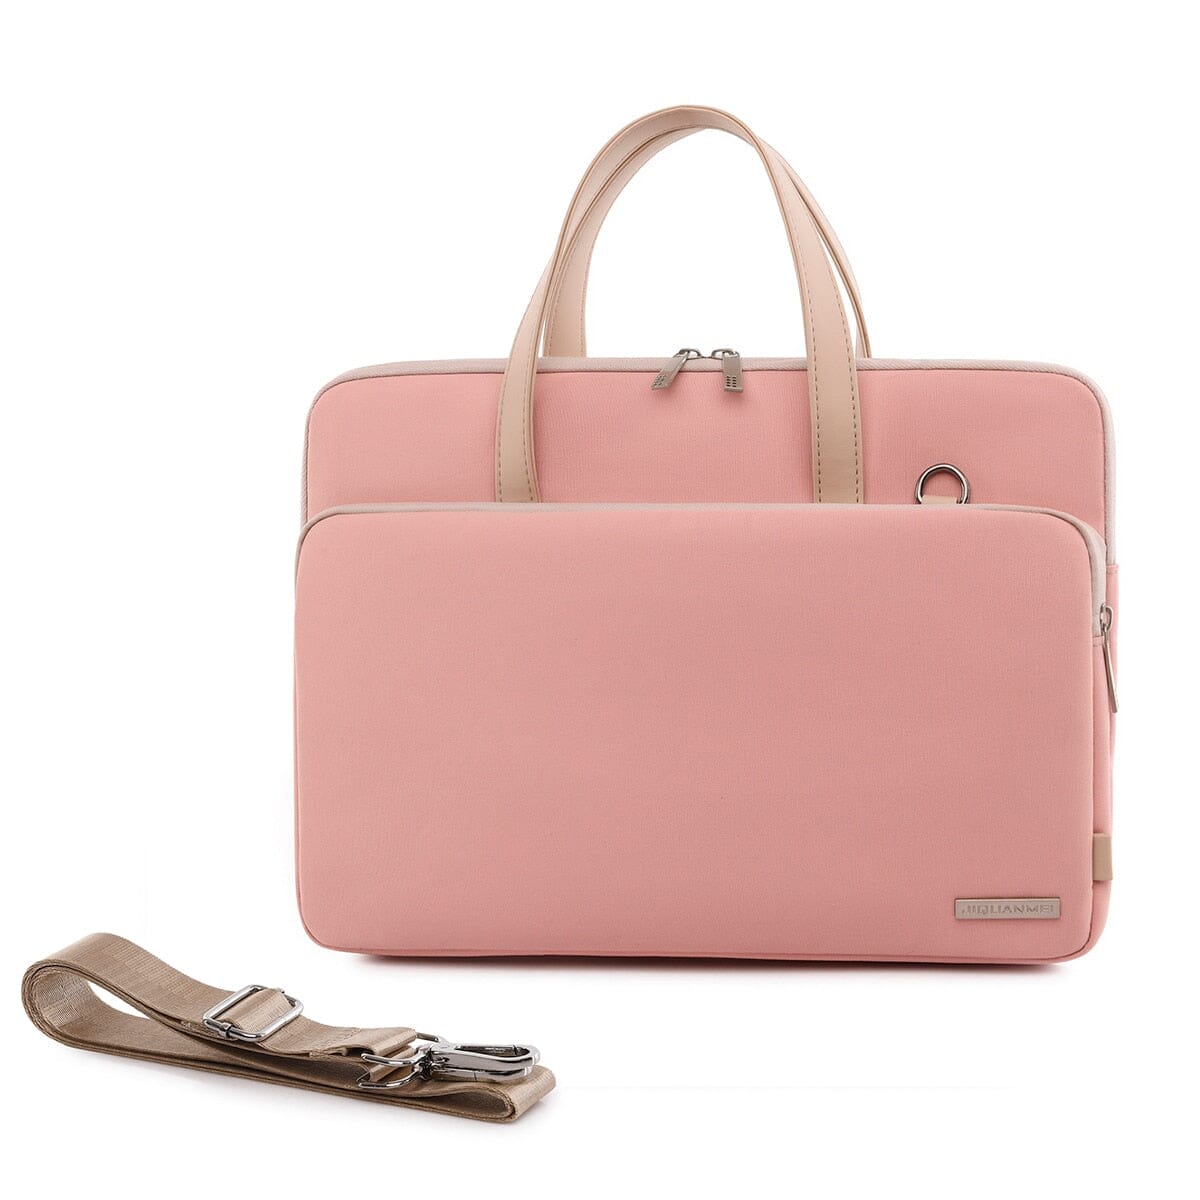 15 Inch Laptop Handbag The Store Bags Pink For 15.6-16 inch 